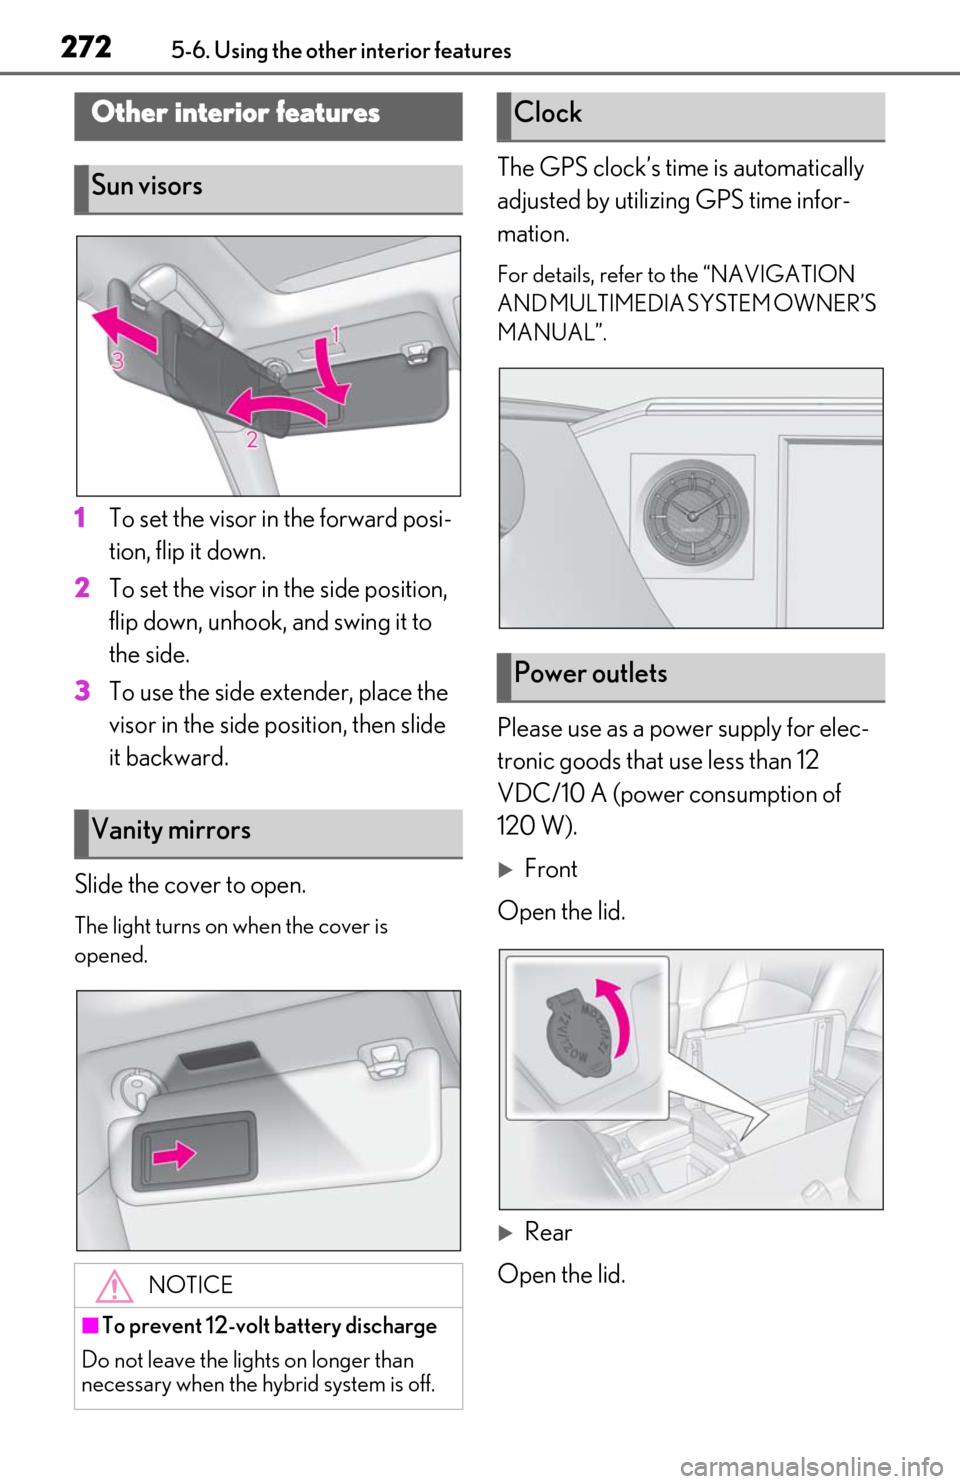 Lexus ES300h 2019  Owners Manual (OM06178U) 2725-6. Using the other interior features
5-6.Using the other interior features
1To set the visor in the forward posi-
tion, flip it down.
2
To set the visor in the side position, 
flip down, unhook, 